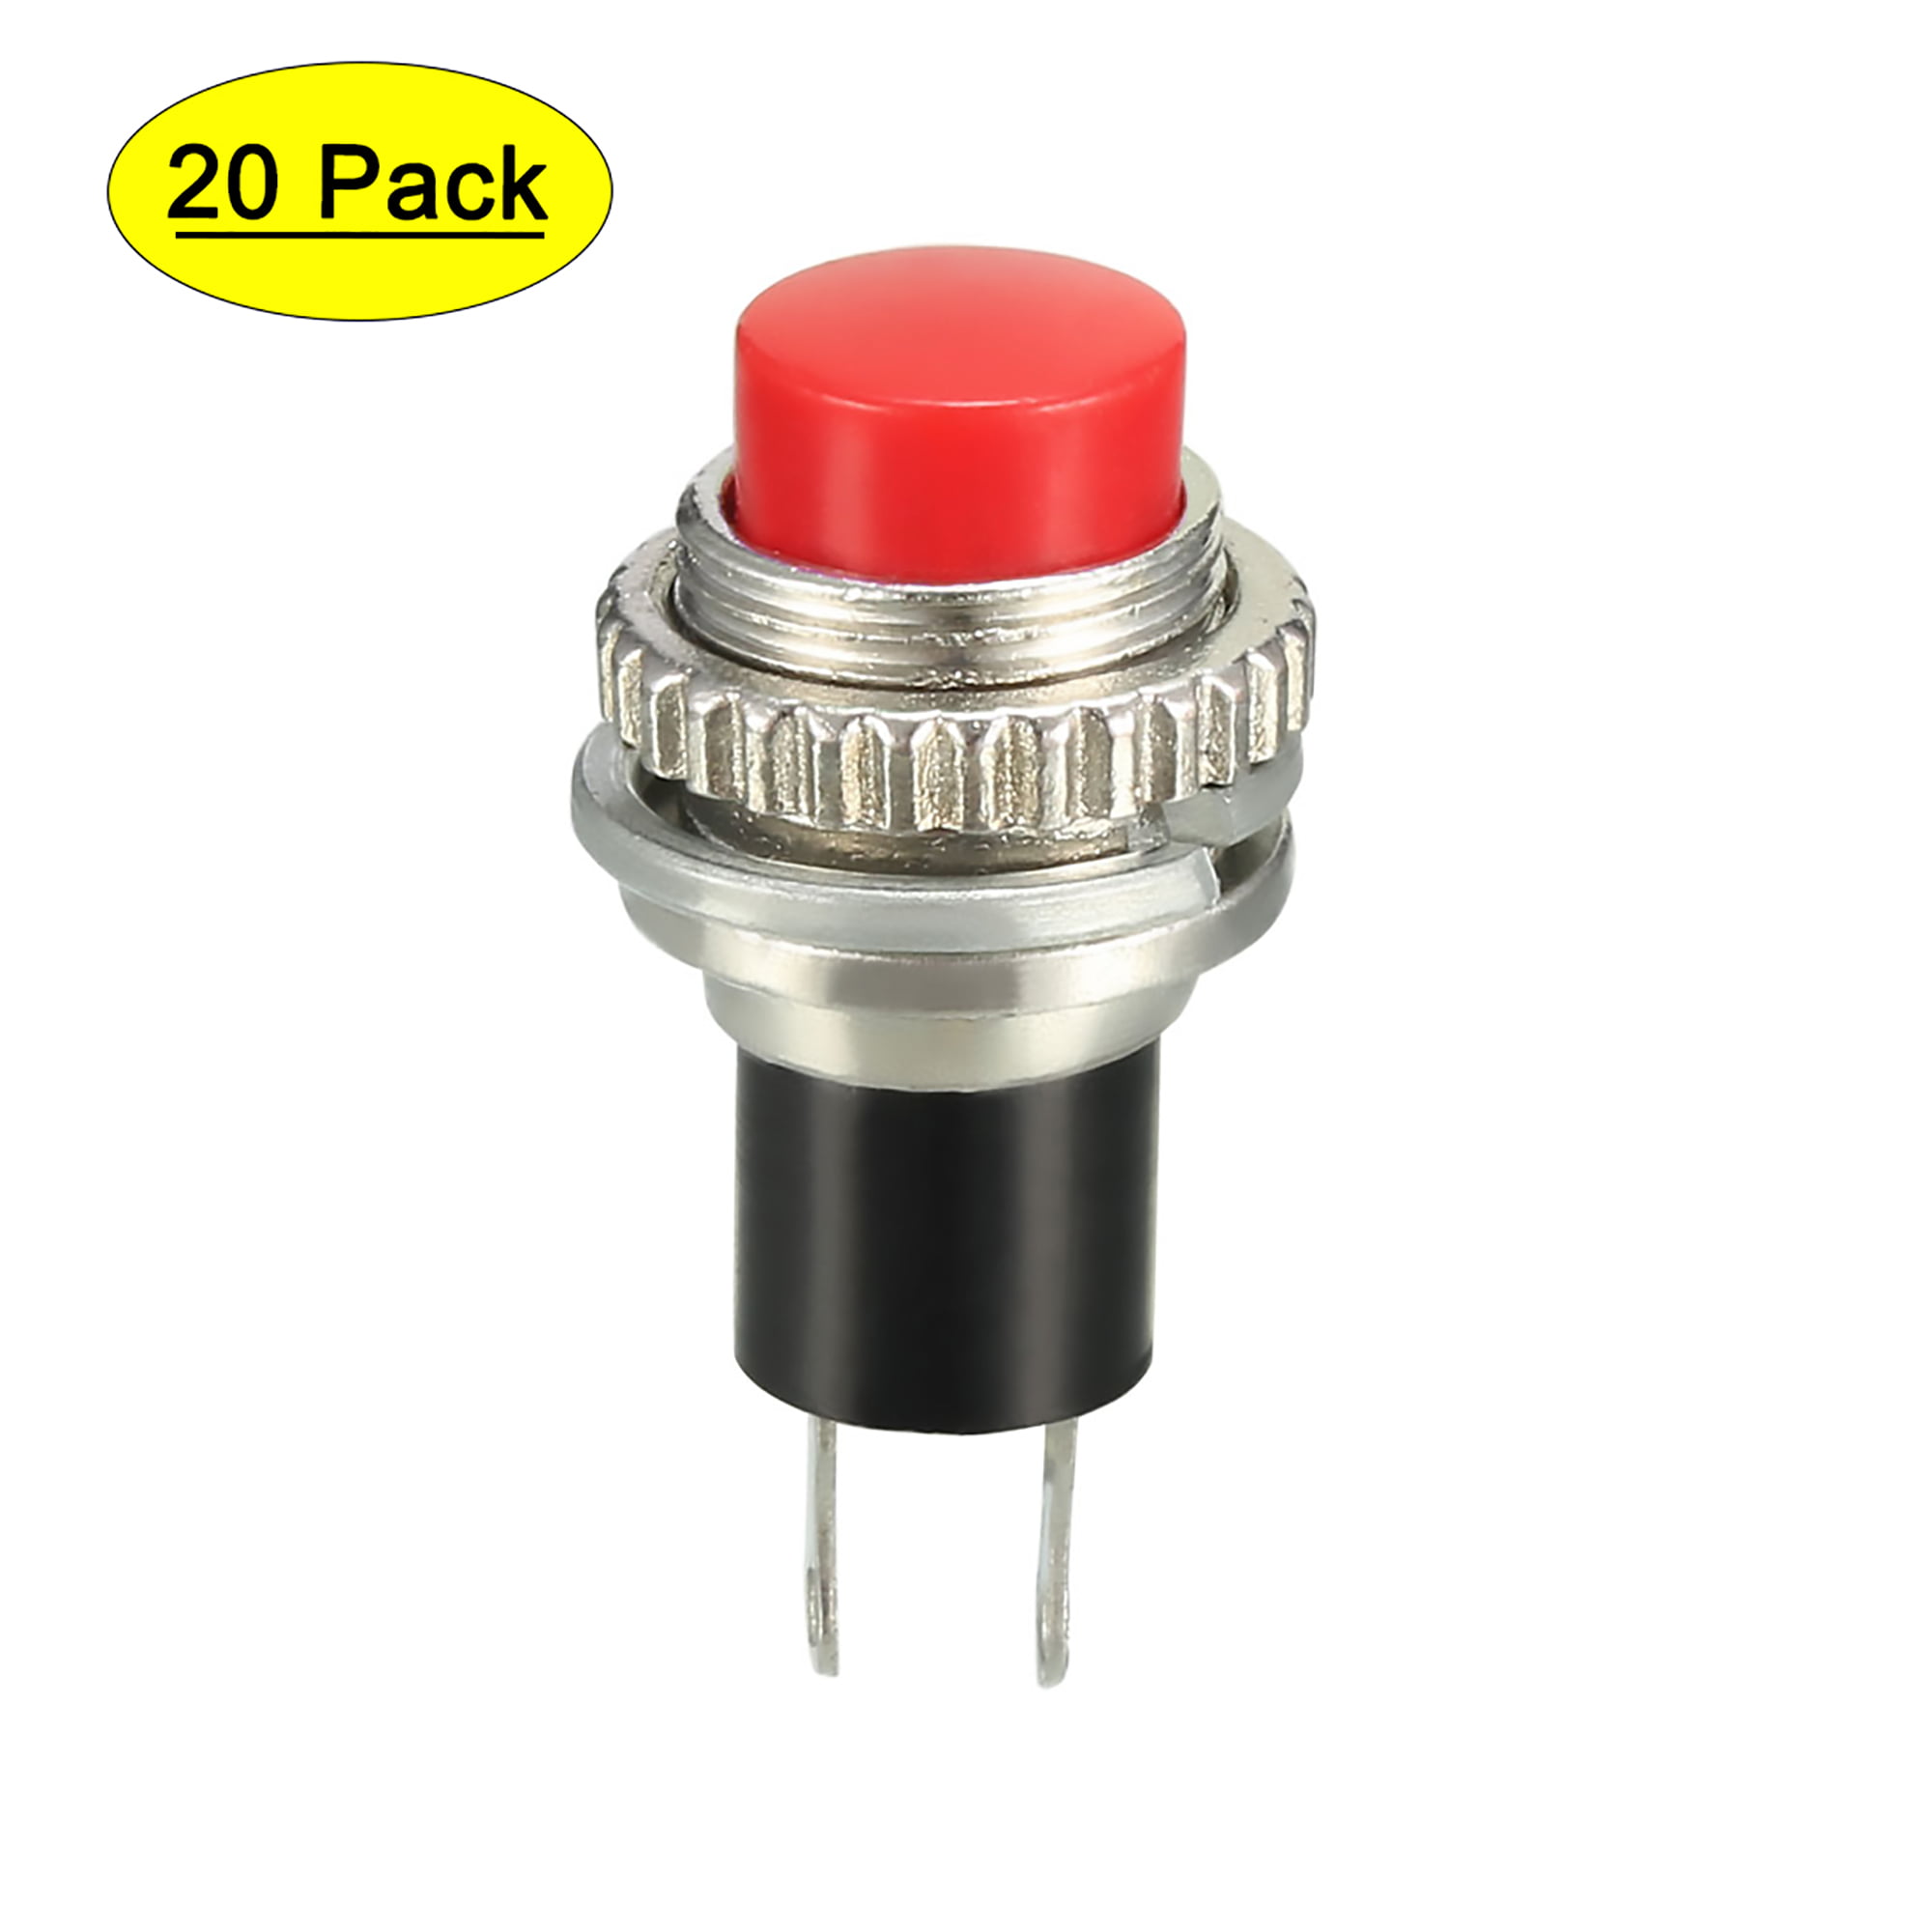 4 Pack SPST Normally Open Momentary Push Button Switch Red 